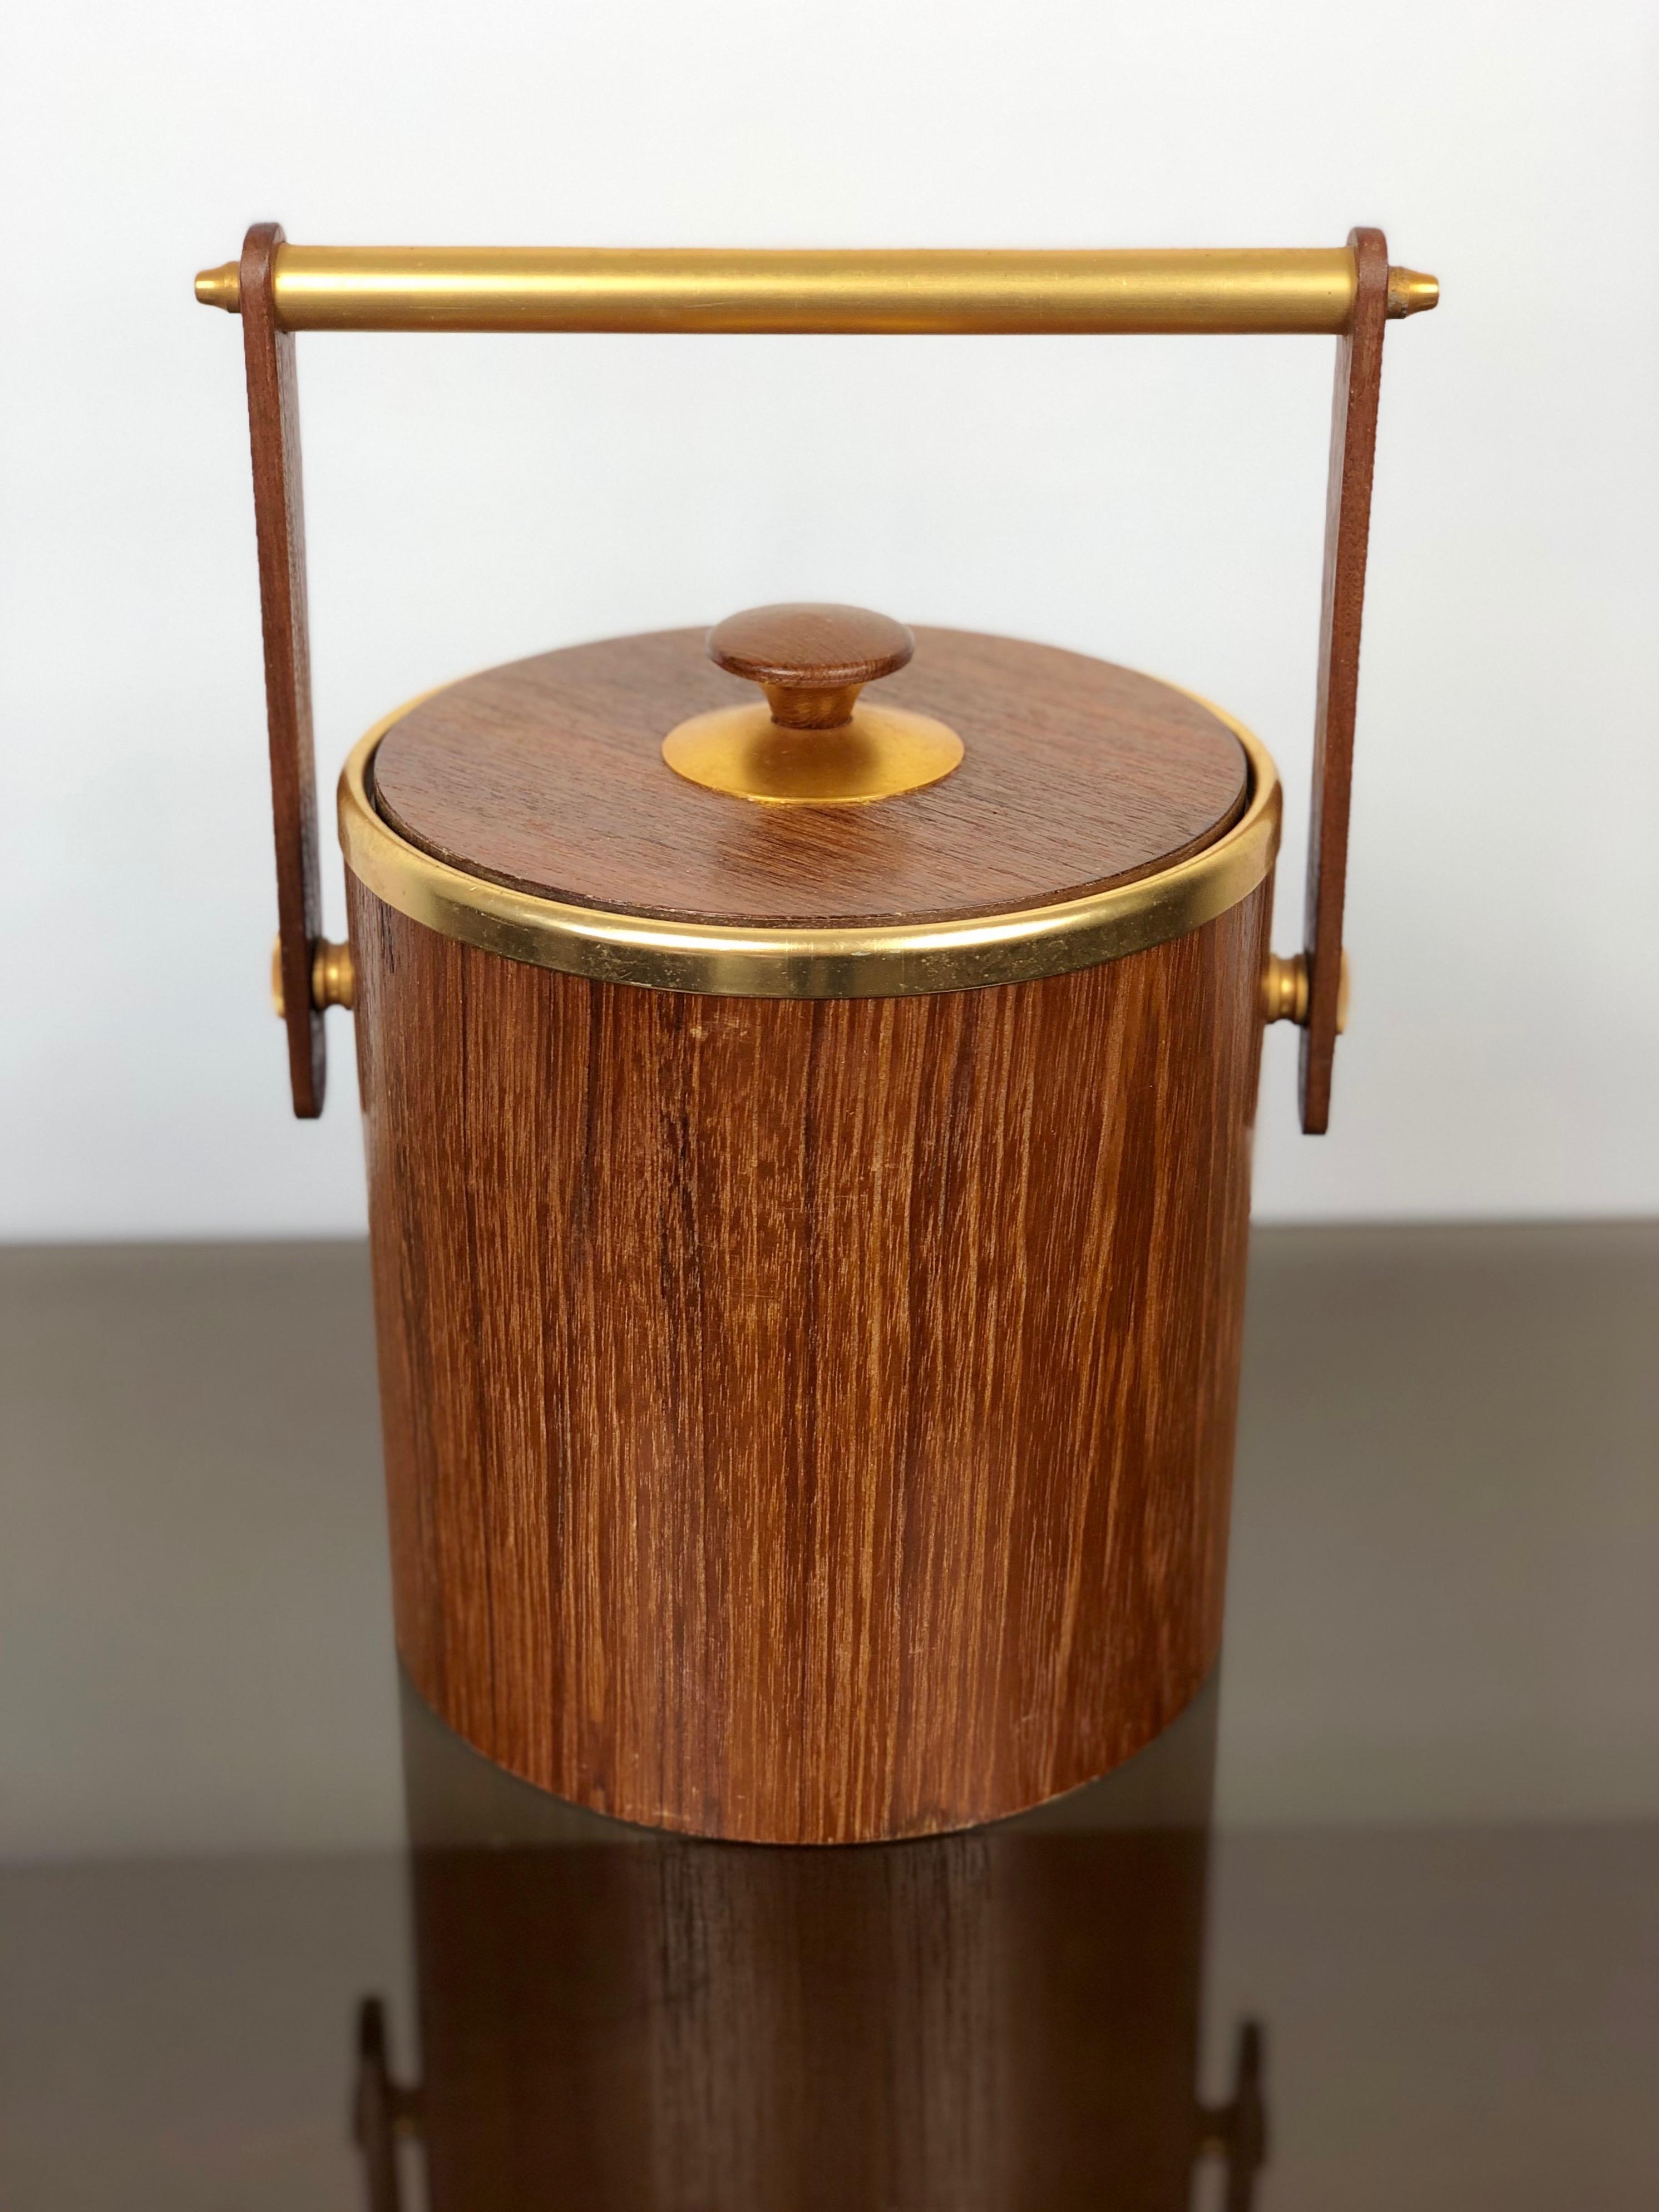 Italian ice bucket in teak and gold metal details, circa 1960s. 

The 